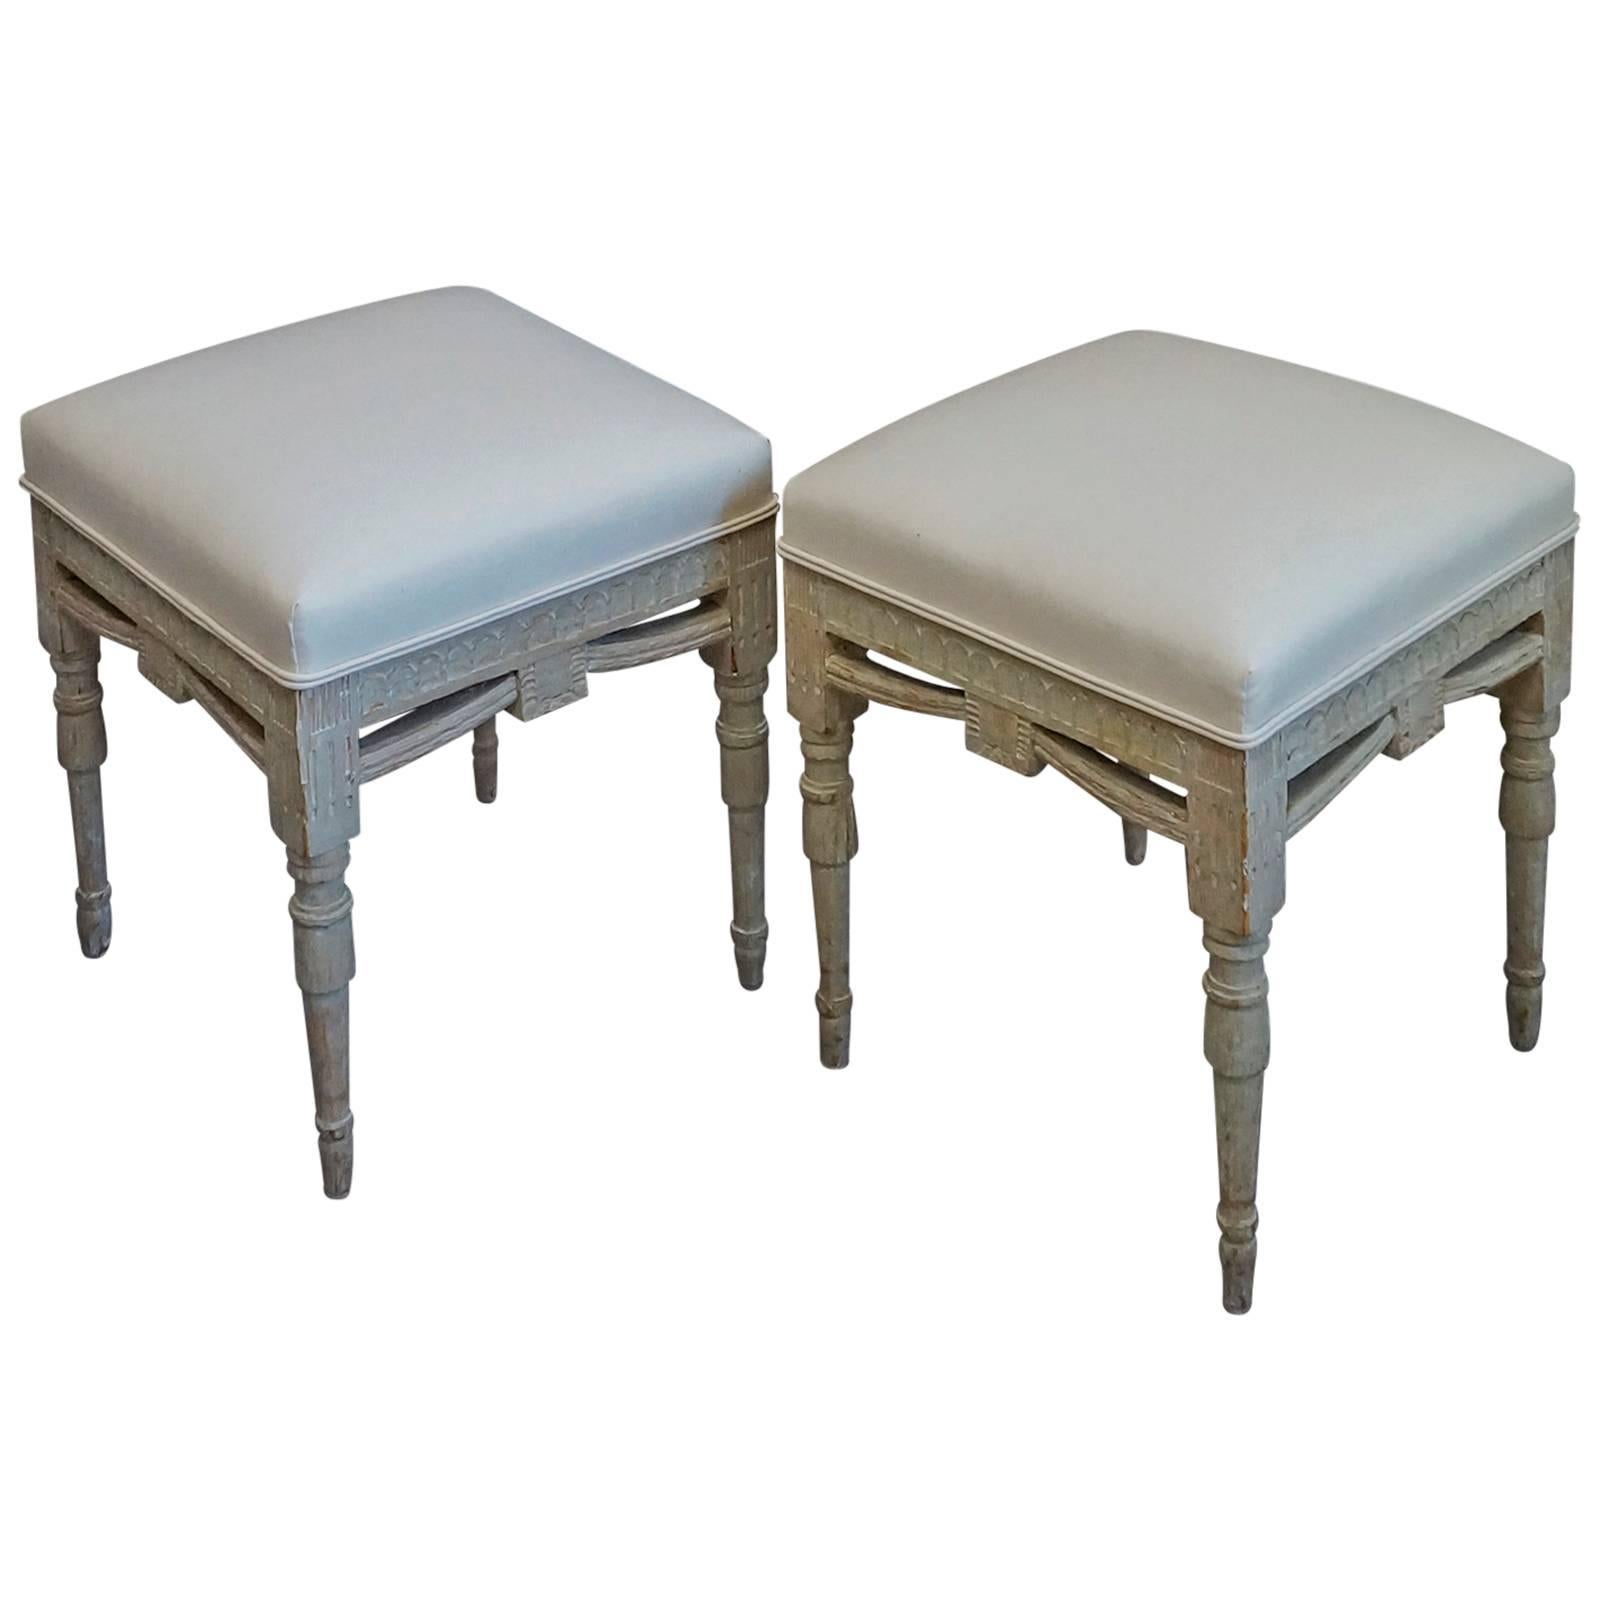 Pair of Swedish Stools For Sale